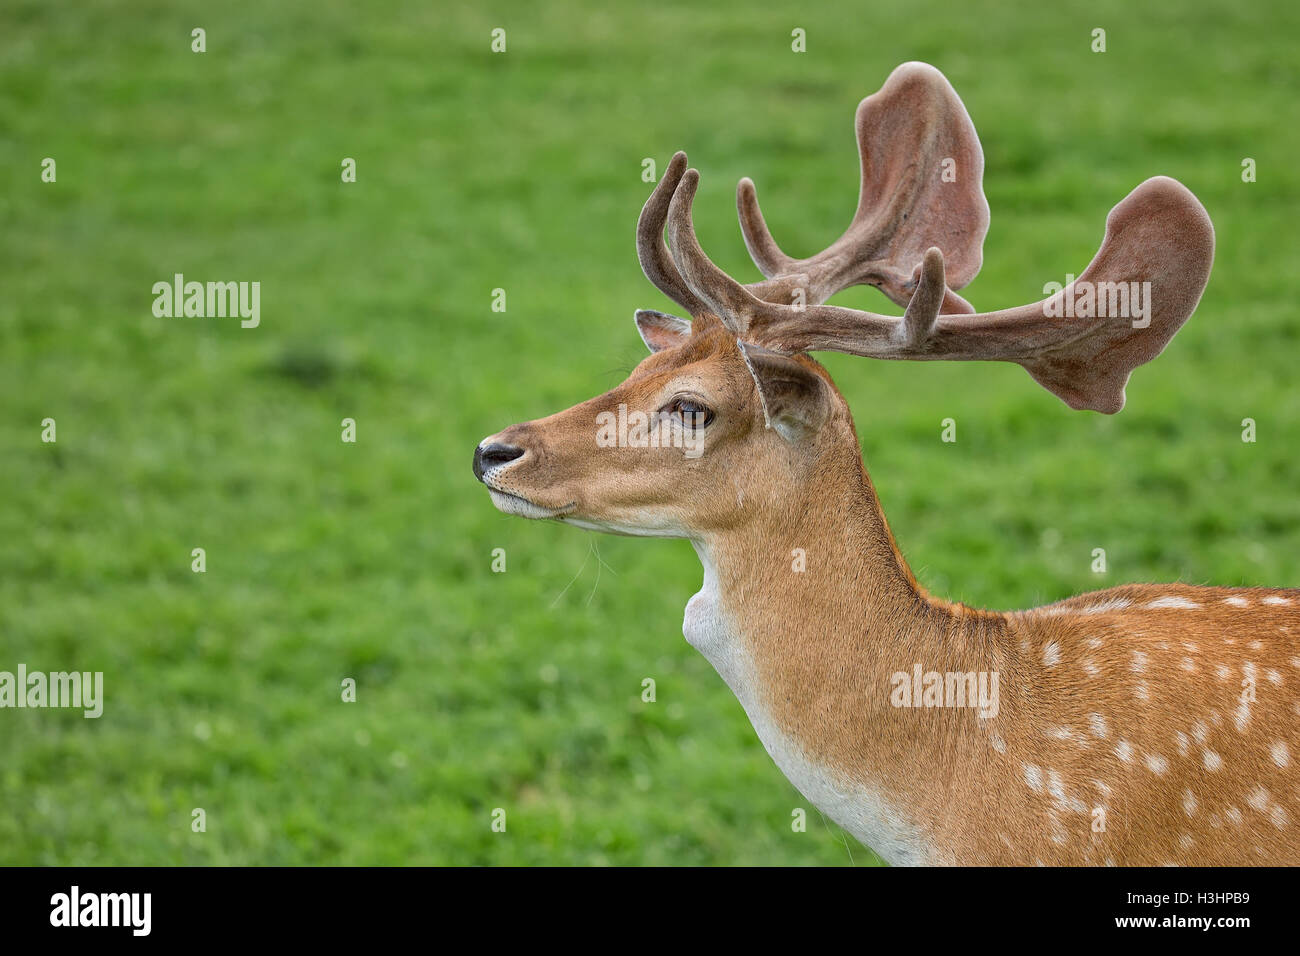 Fallow deer in a clearing, a portrait Stock Photo